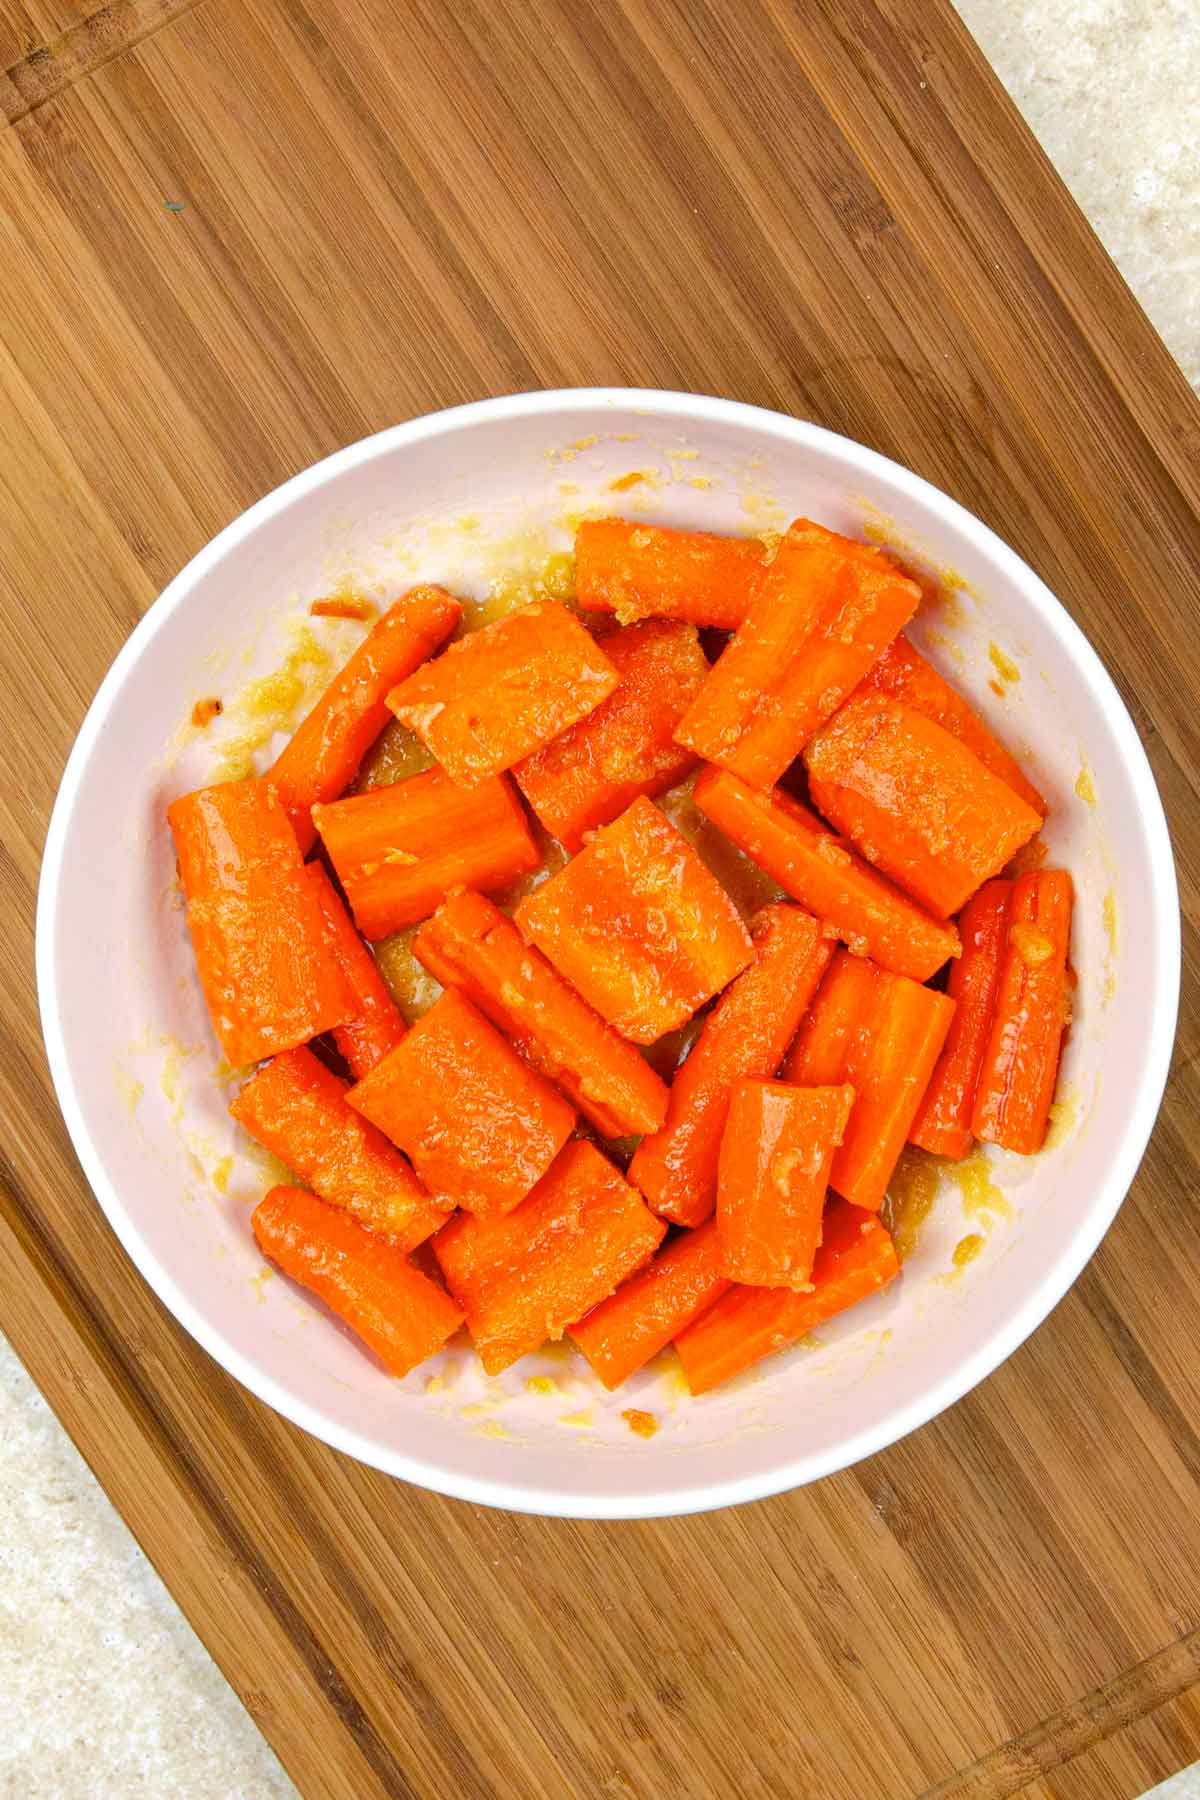 toss the raw carrots in the honey brown sugar glaze